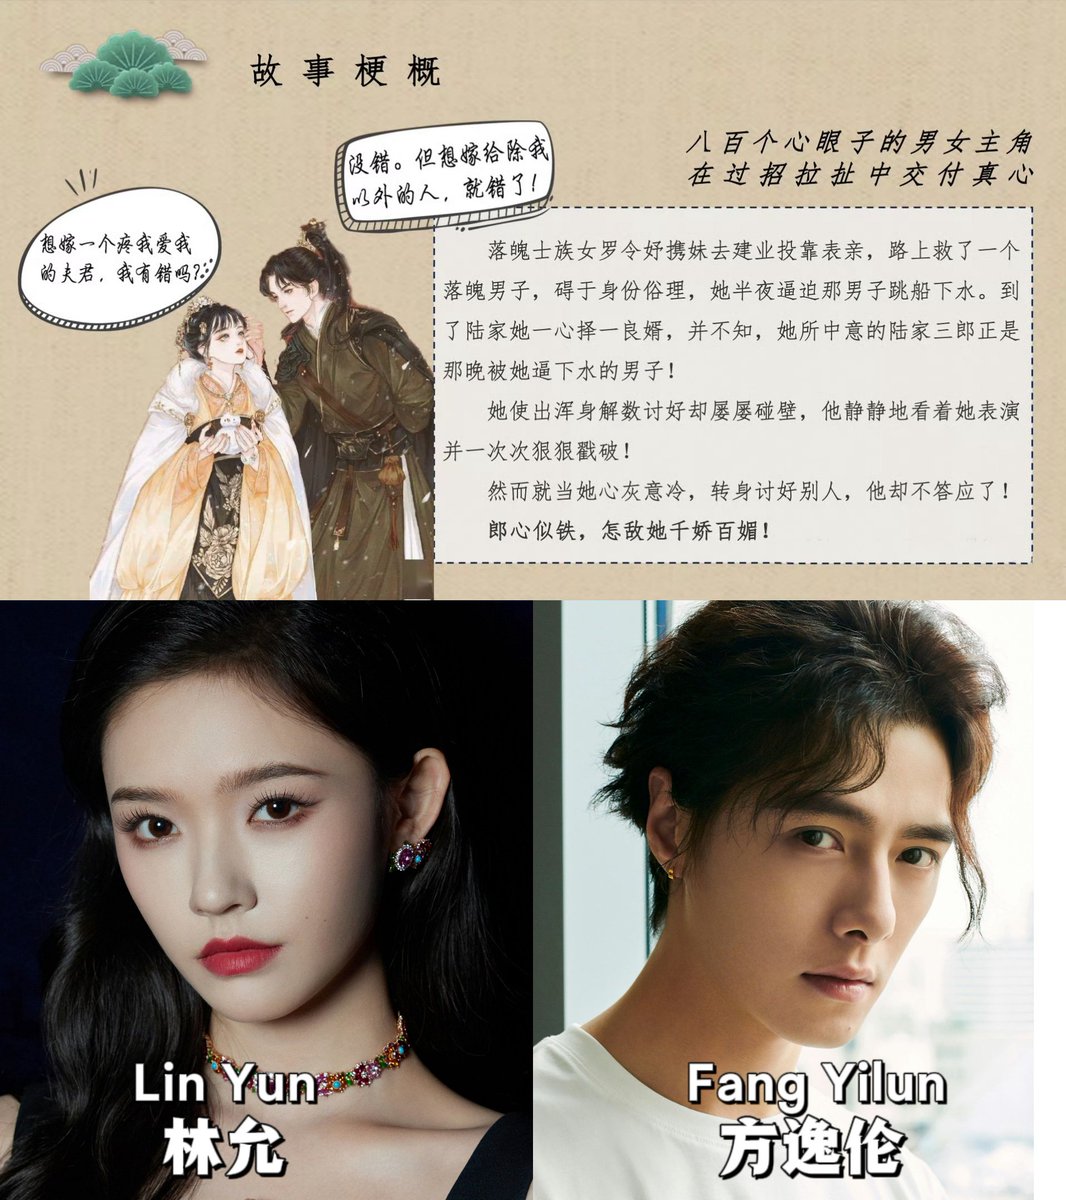 Drama #怎敌她千娇百媚/#千娇百媚
(Zen di ta qian jiao bai mei/How to resist her thousands of charms and hundreds of flirtations) rumored to star #LinYun #林允 and #FangYilun #方逸伦 is schedule to start-up in mid-May 2024.